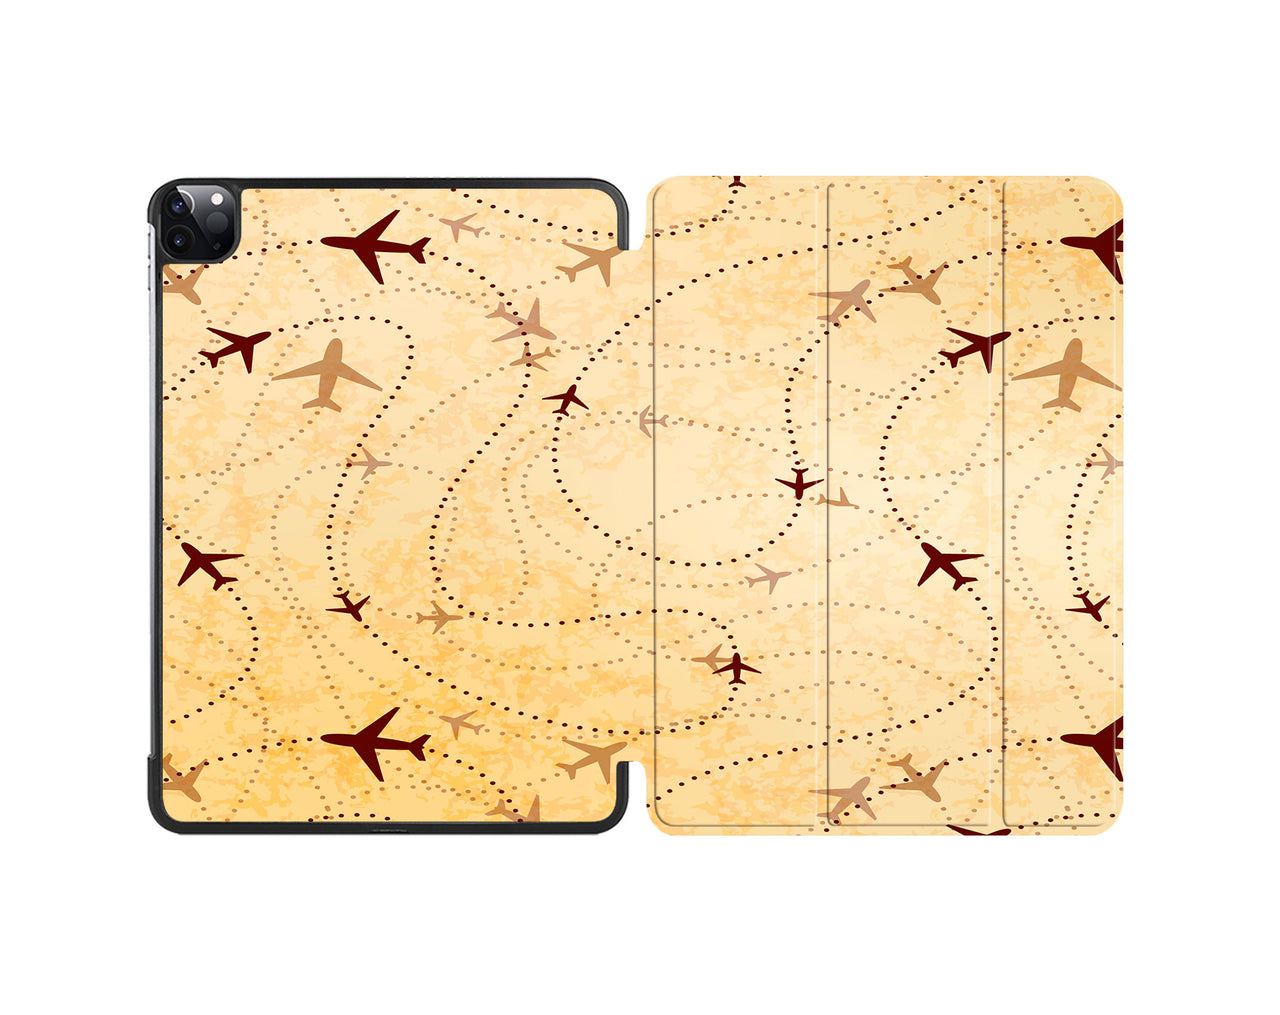 Vintage Travelling with Aircraft Designed iPad Cases